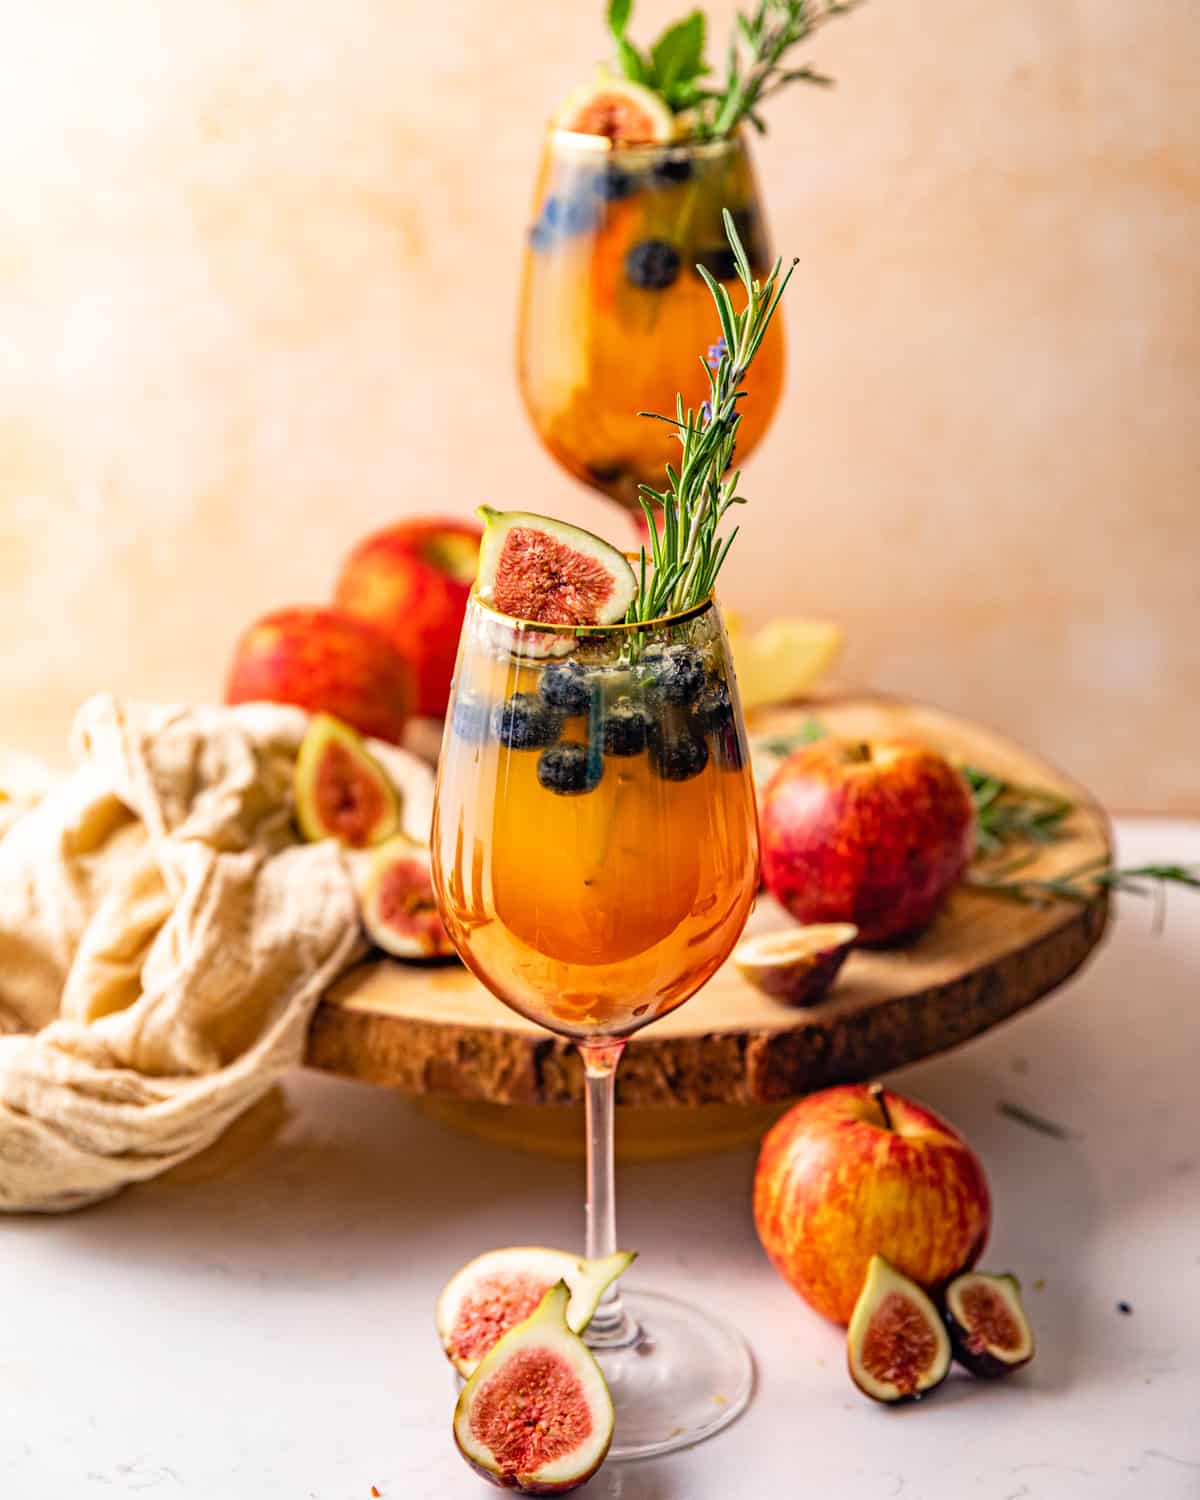 two glasses of white wine sangria garnished with fresh herbs, figs, and apples.